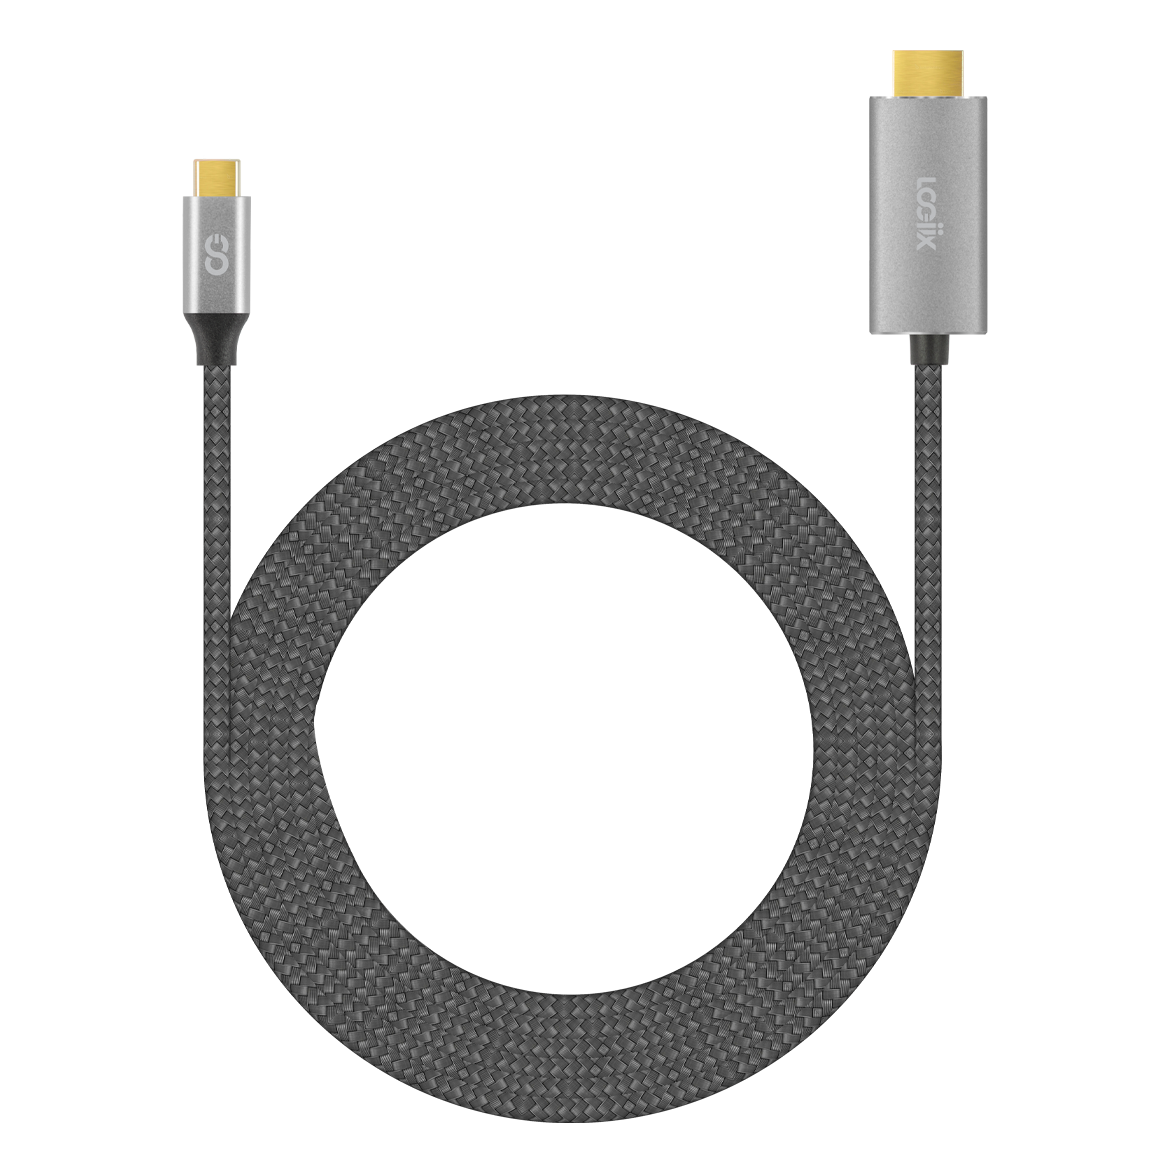 USB TYPE-C to HDMI Braid Cable